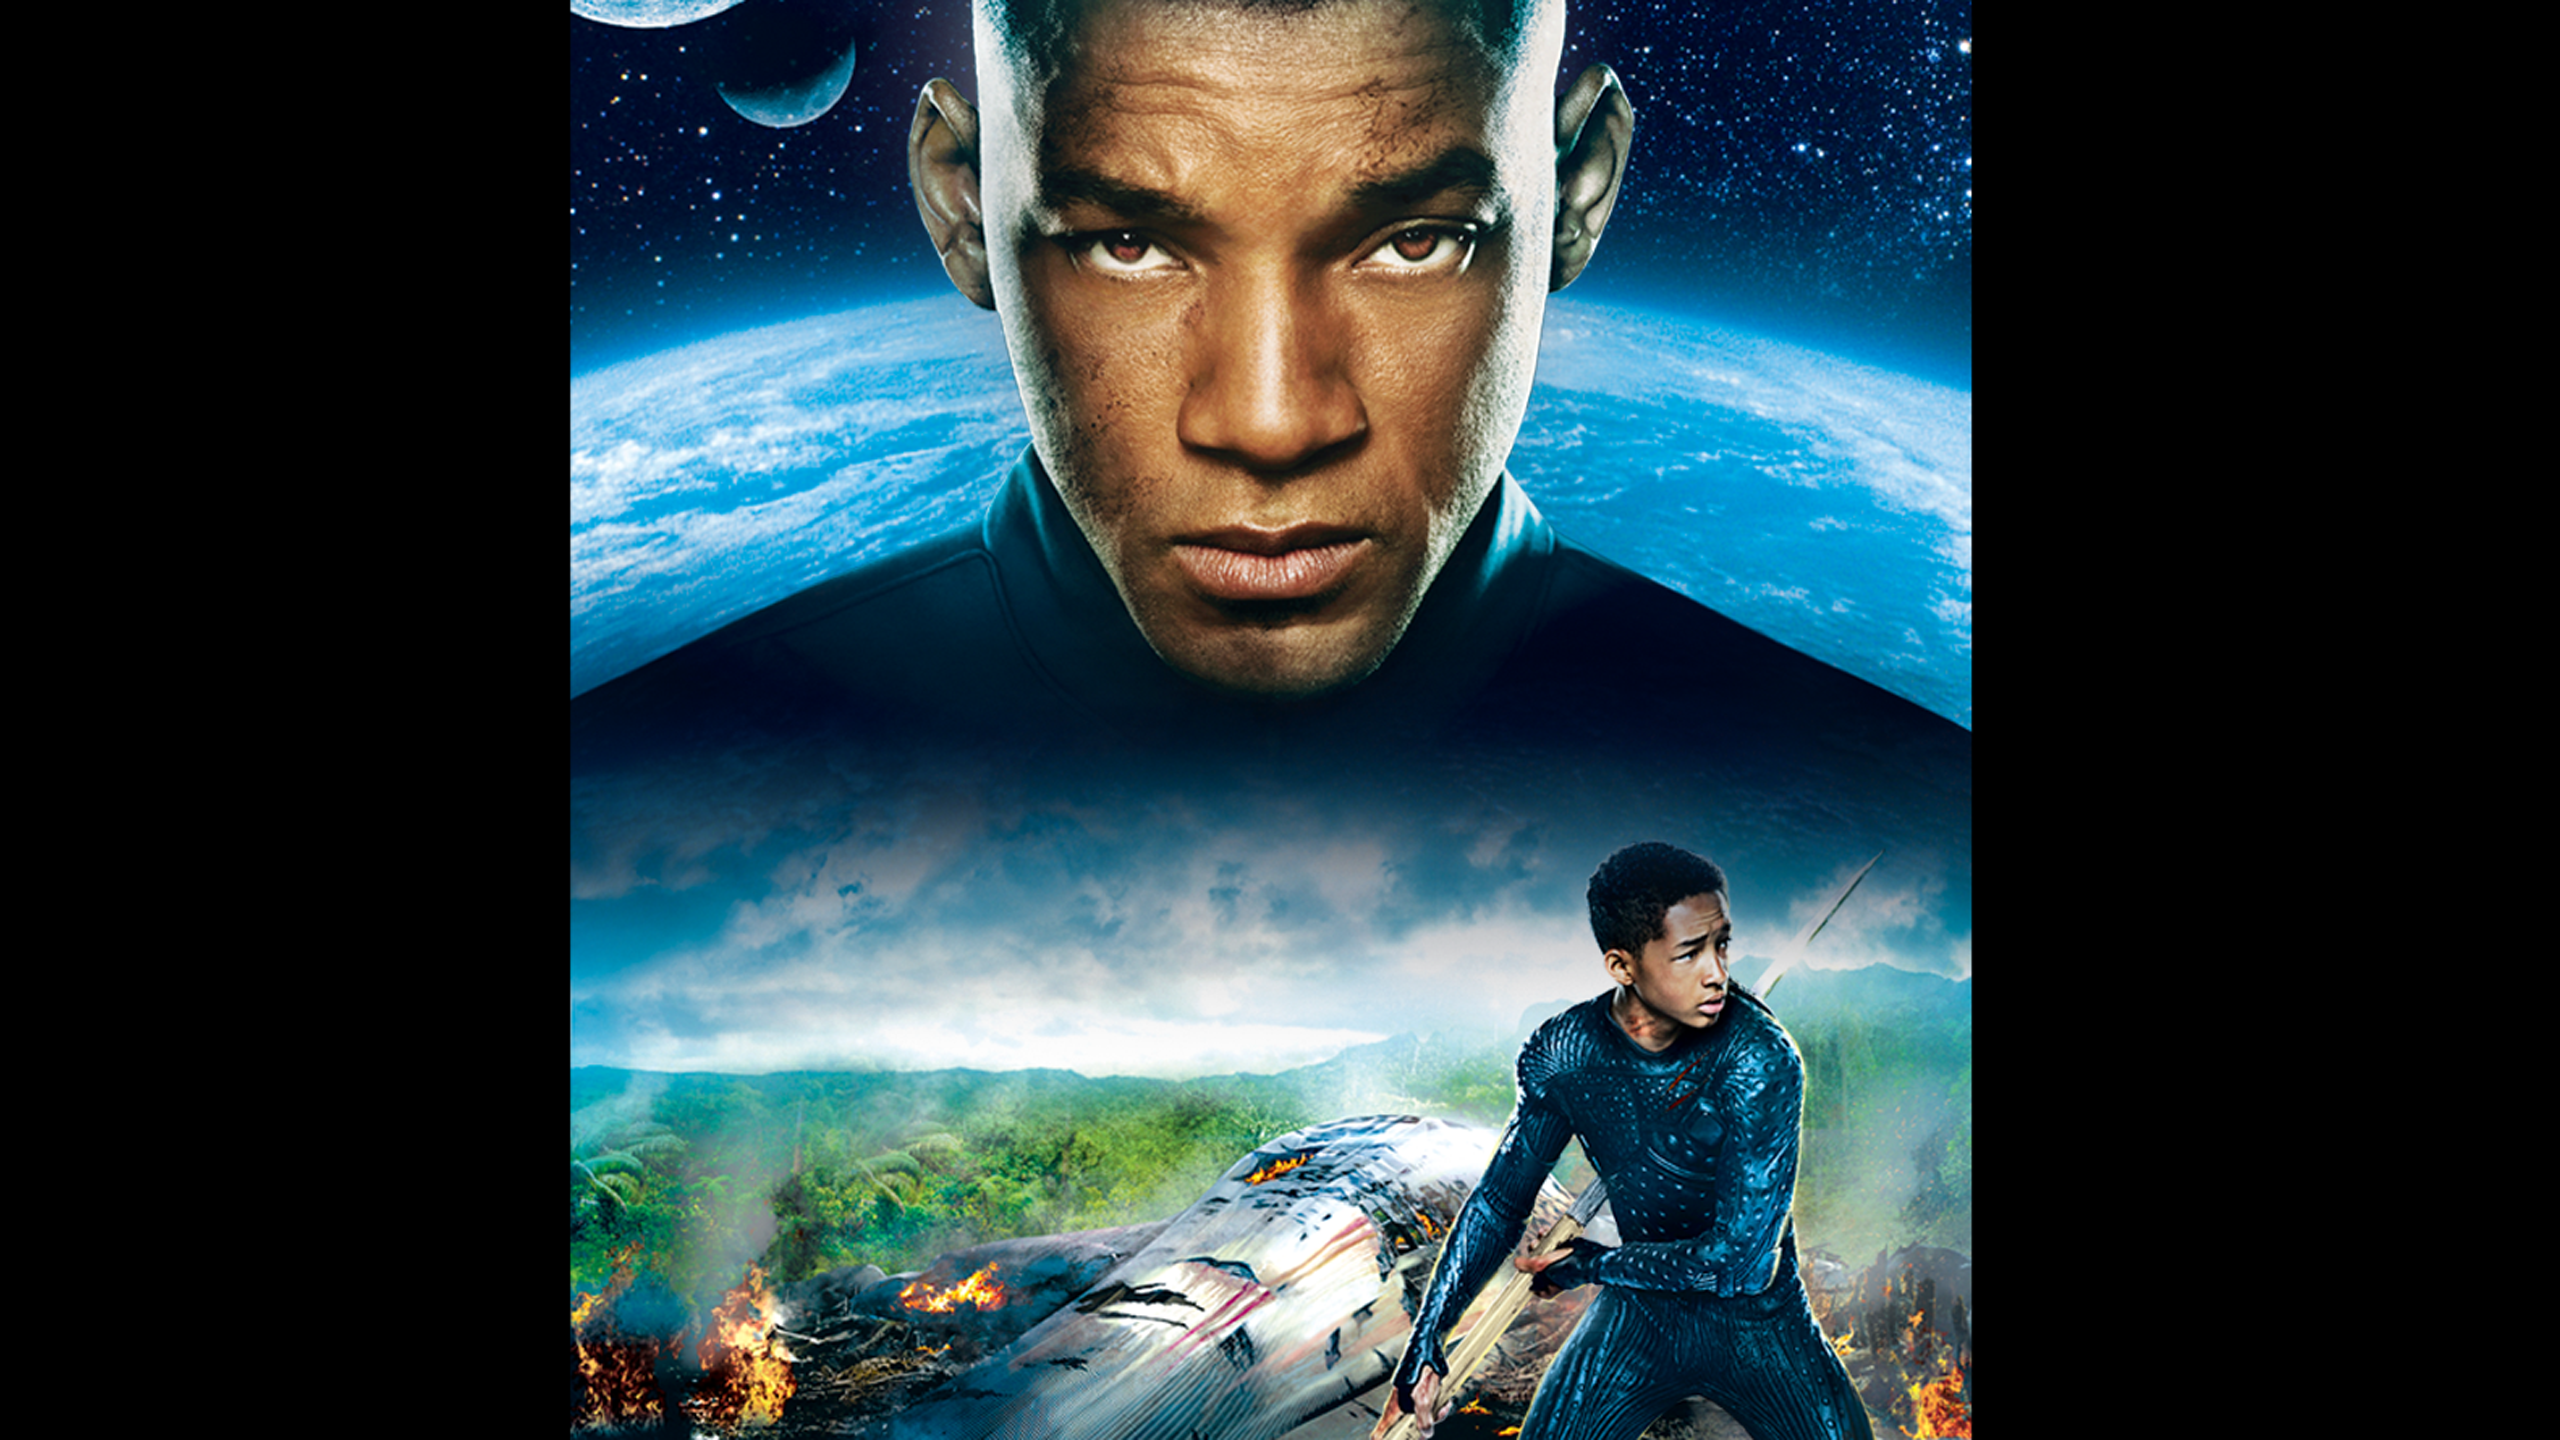 story of after earth movie